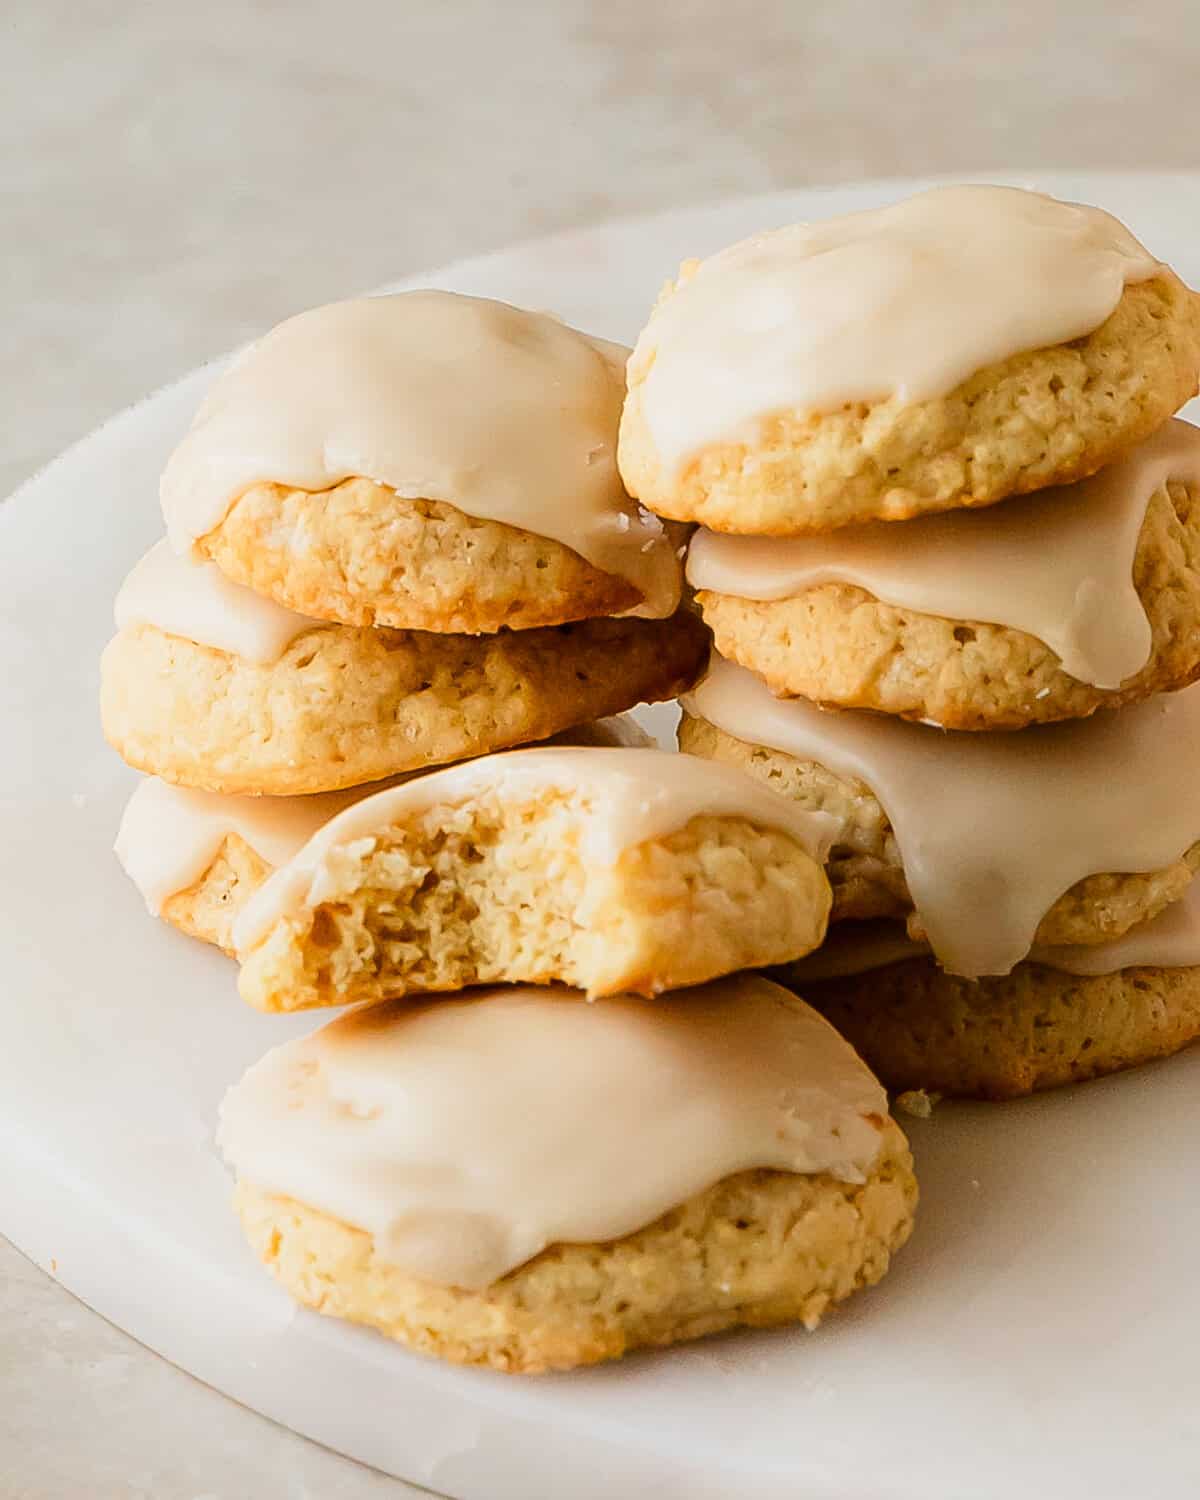 Buttermilk cookies are soft vanilla cookies with a tender, cakey crumb. Also known as Amish cookies, these buttermilk sugar cookies are topped with a sweet and slightly tangy buttermilk glaze. 